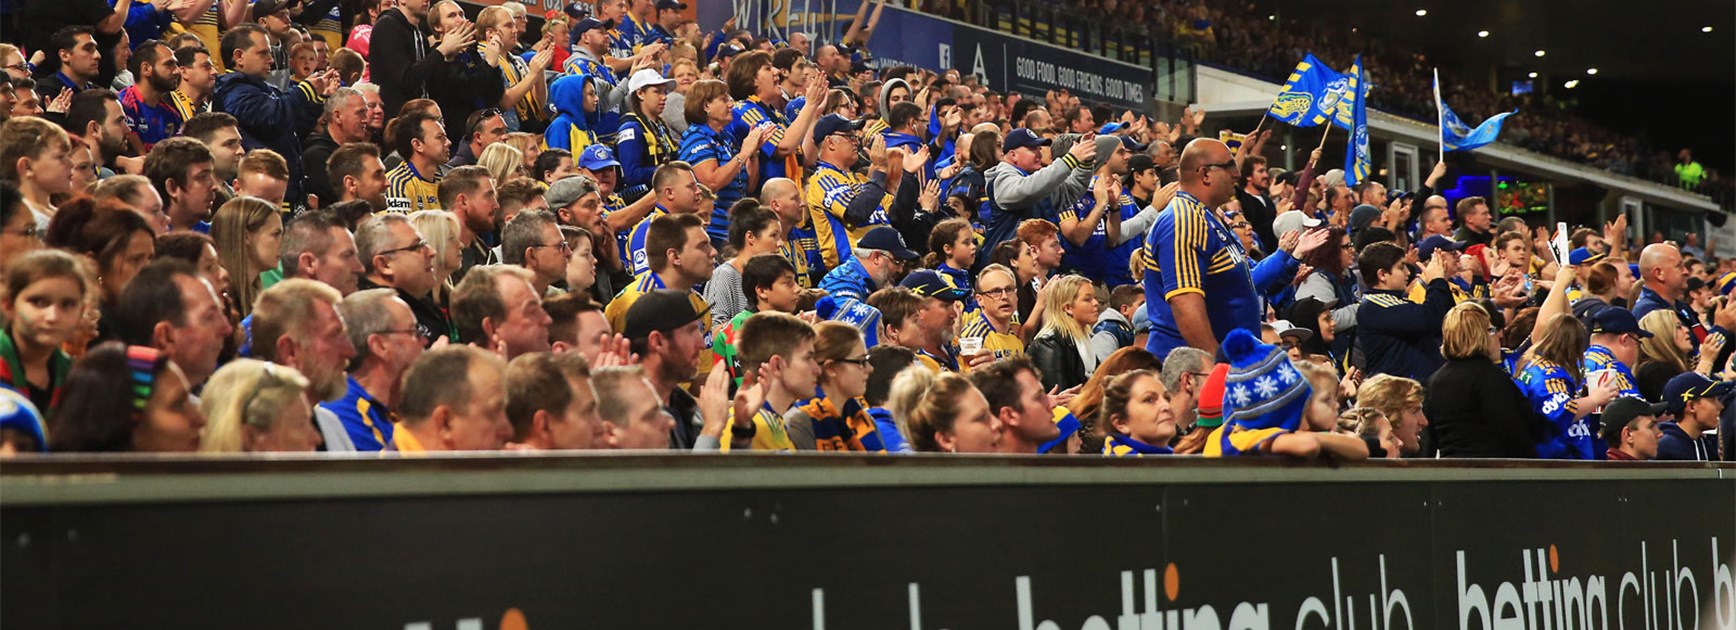 The Parramatta Eels crowd during Thursday night's clash with the Rabbitohs.